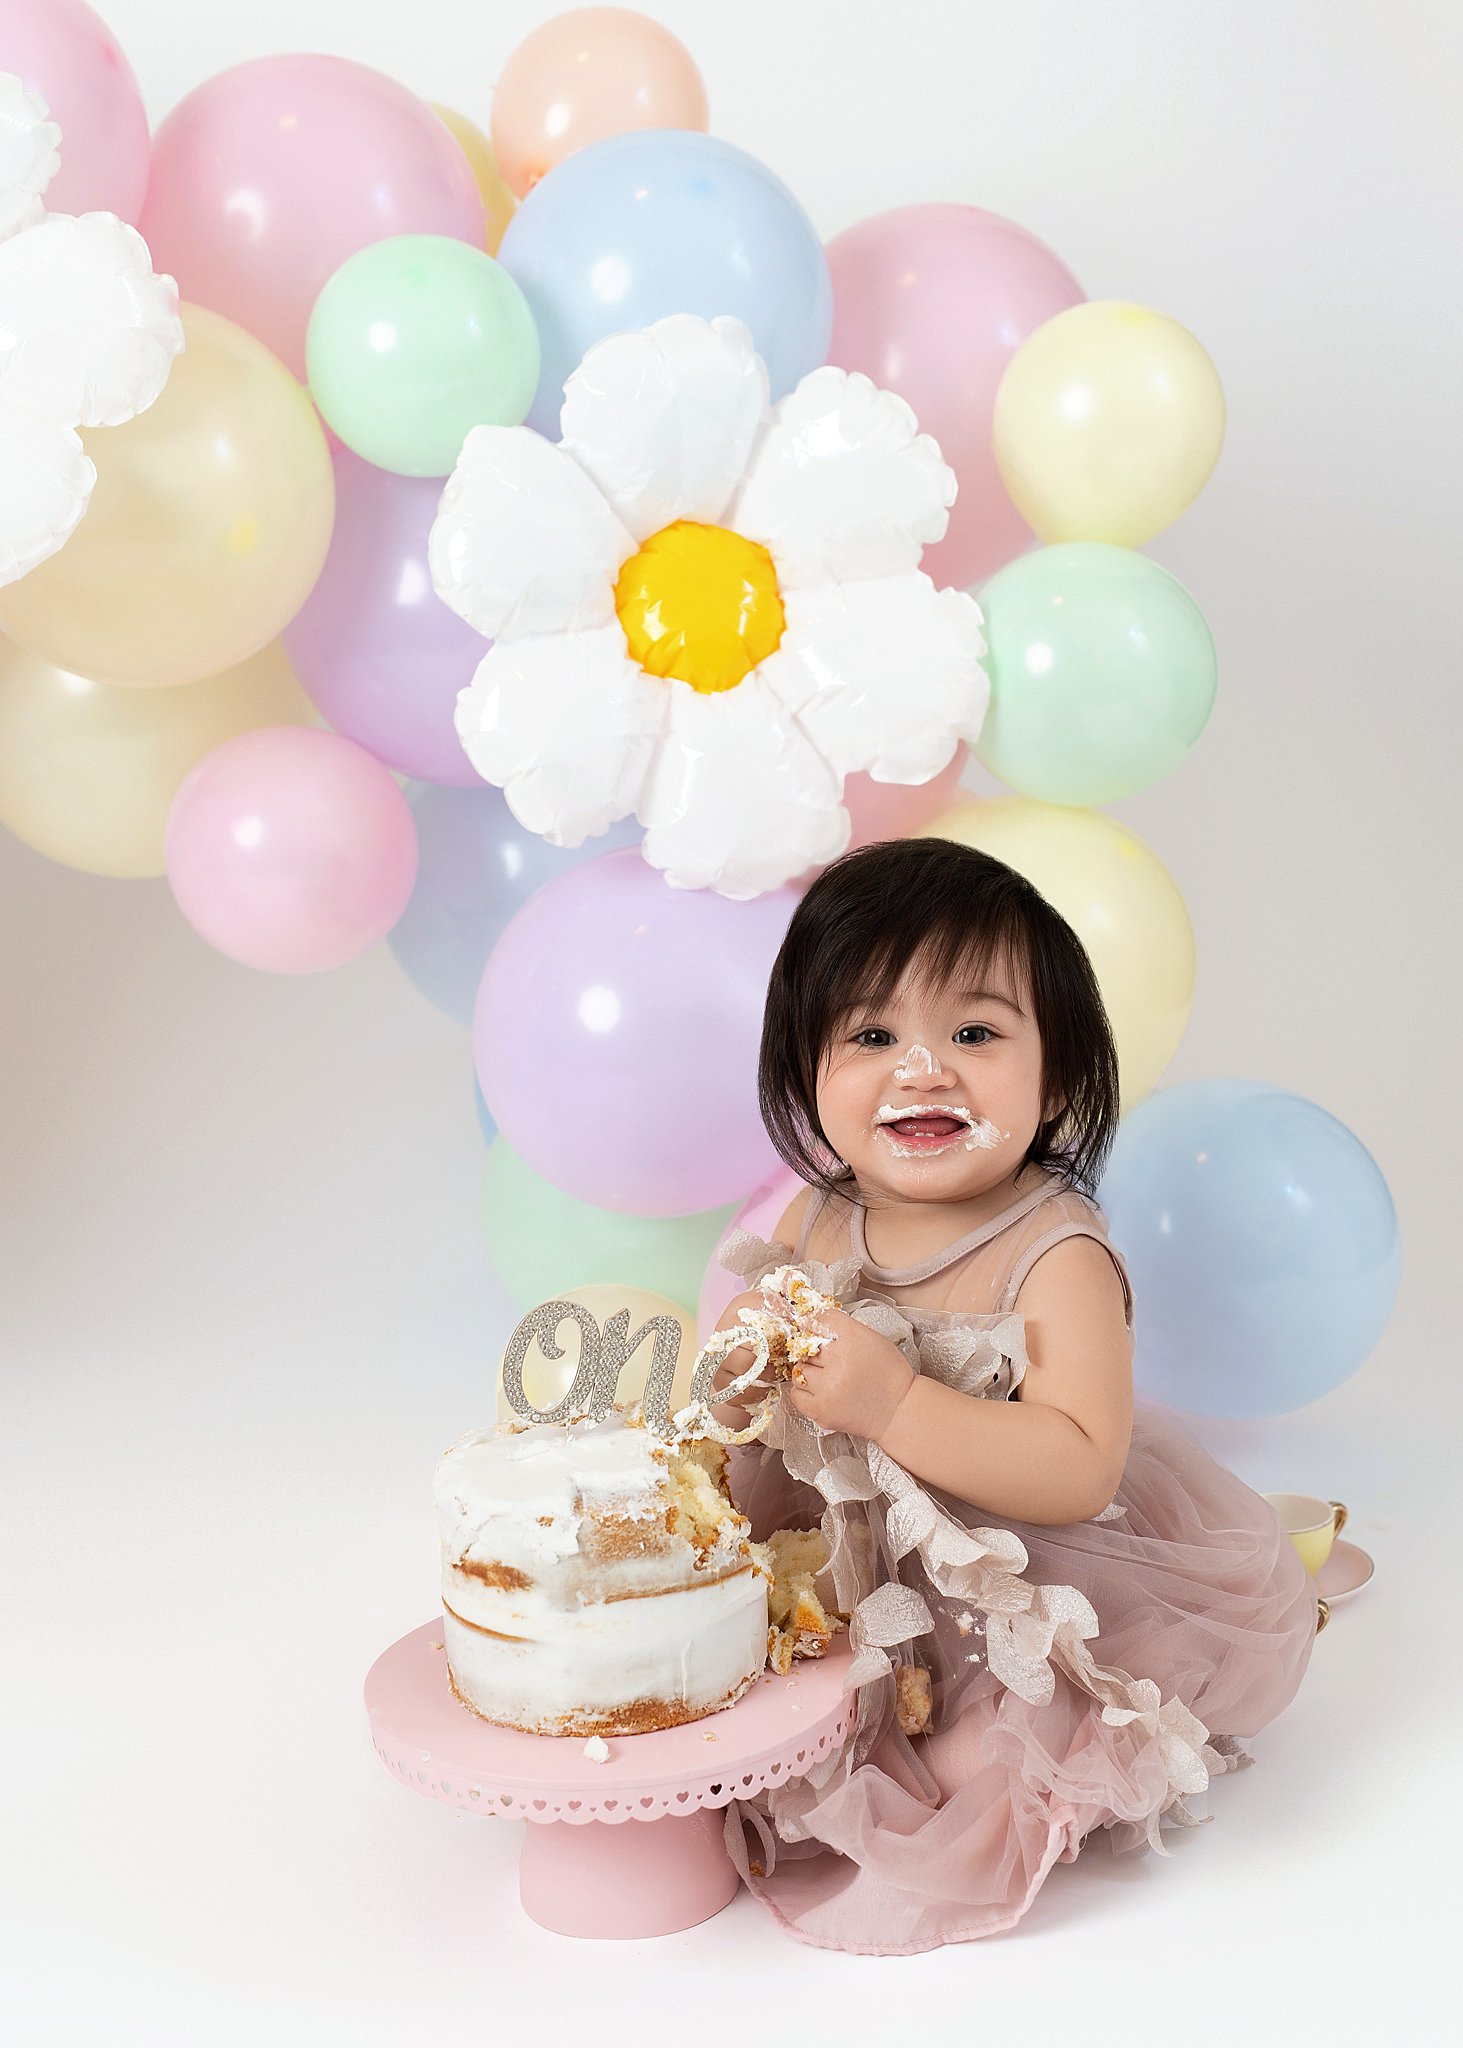 One year old girl sits in a studio smashing a birthday cake The Children’s Place in Houston